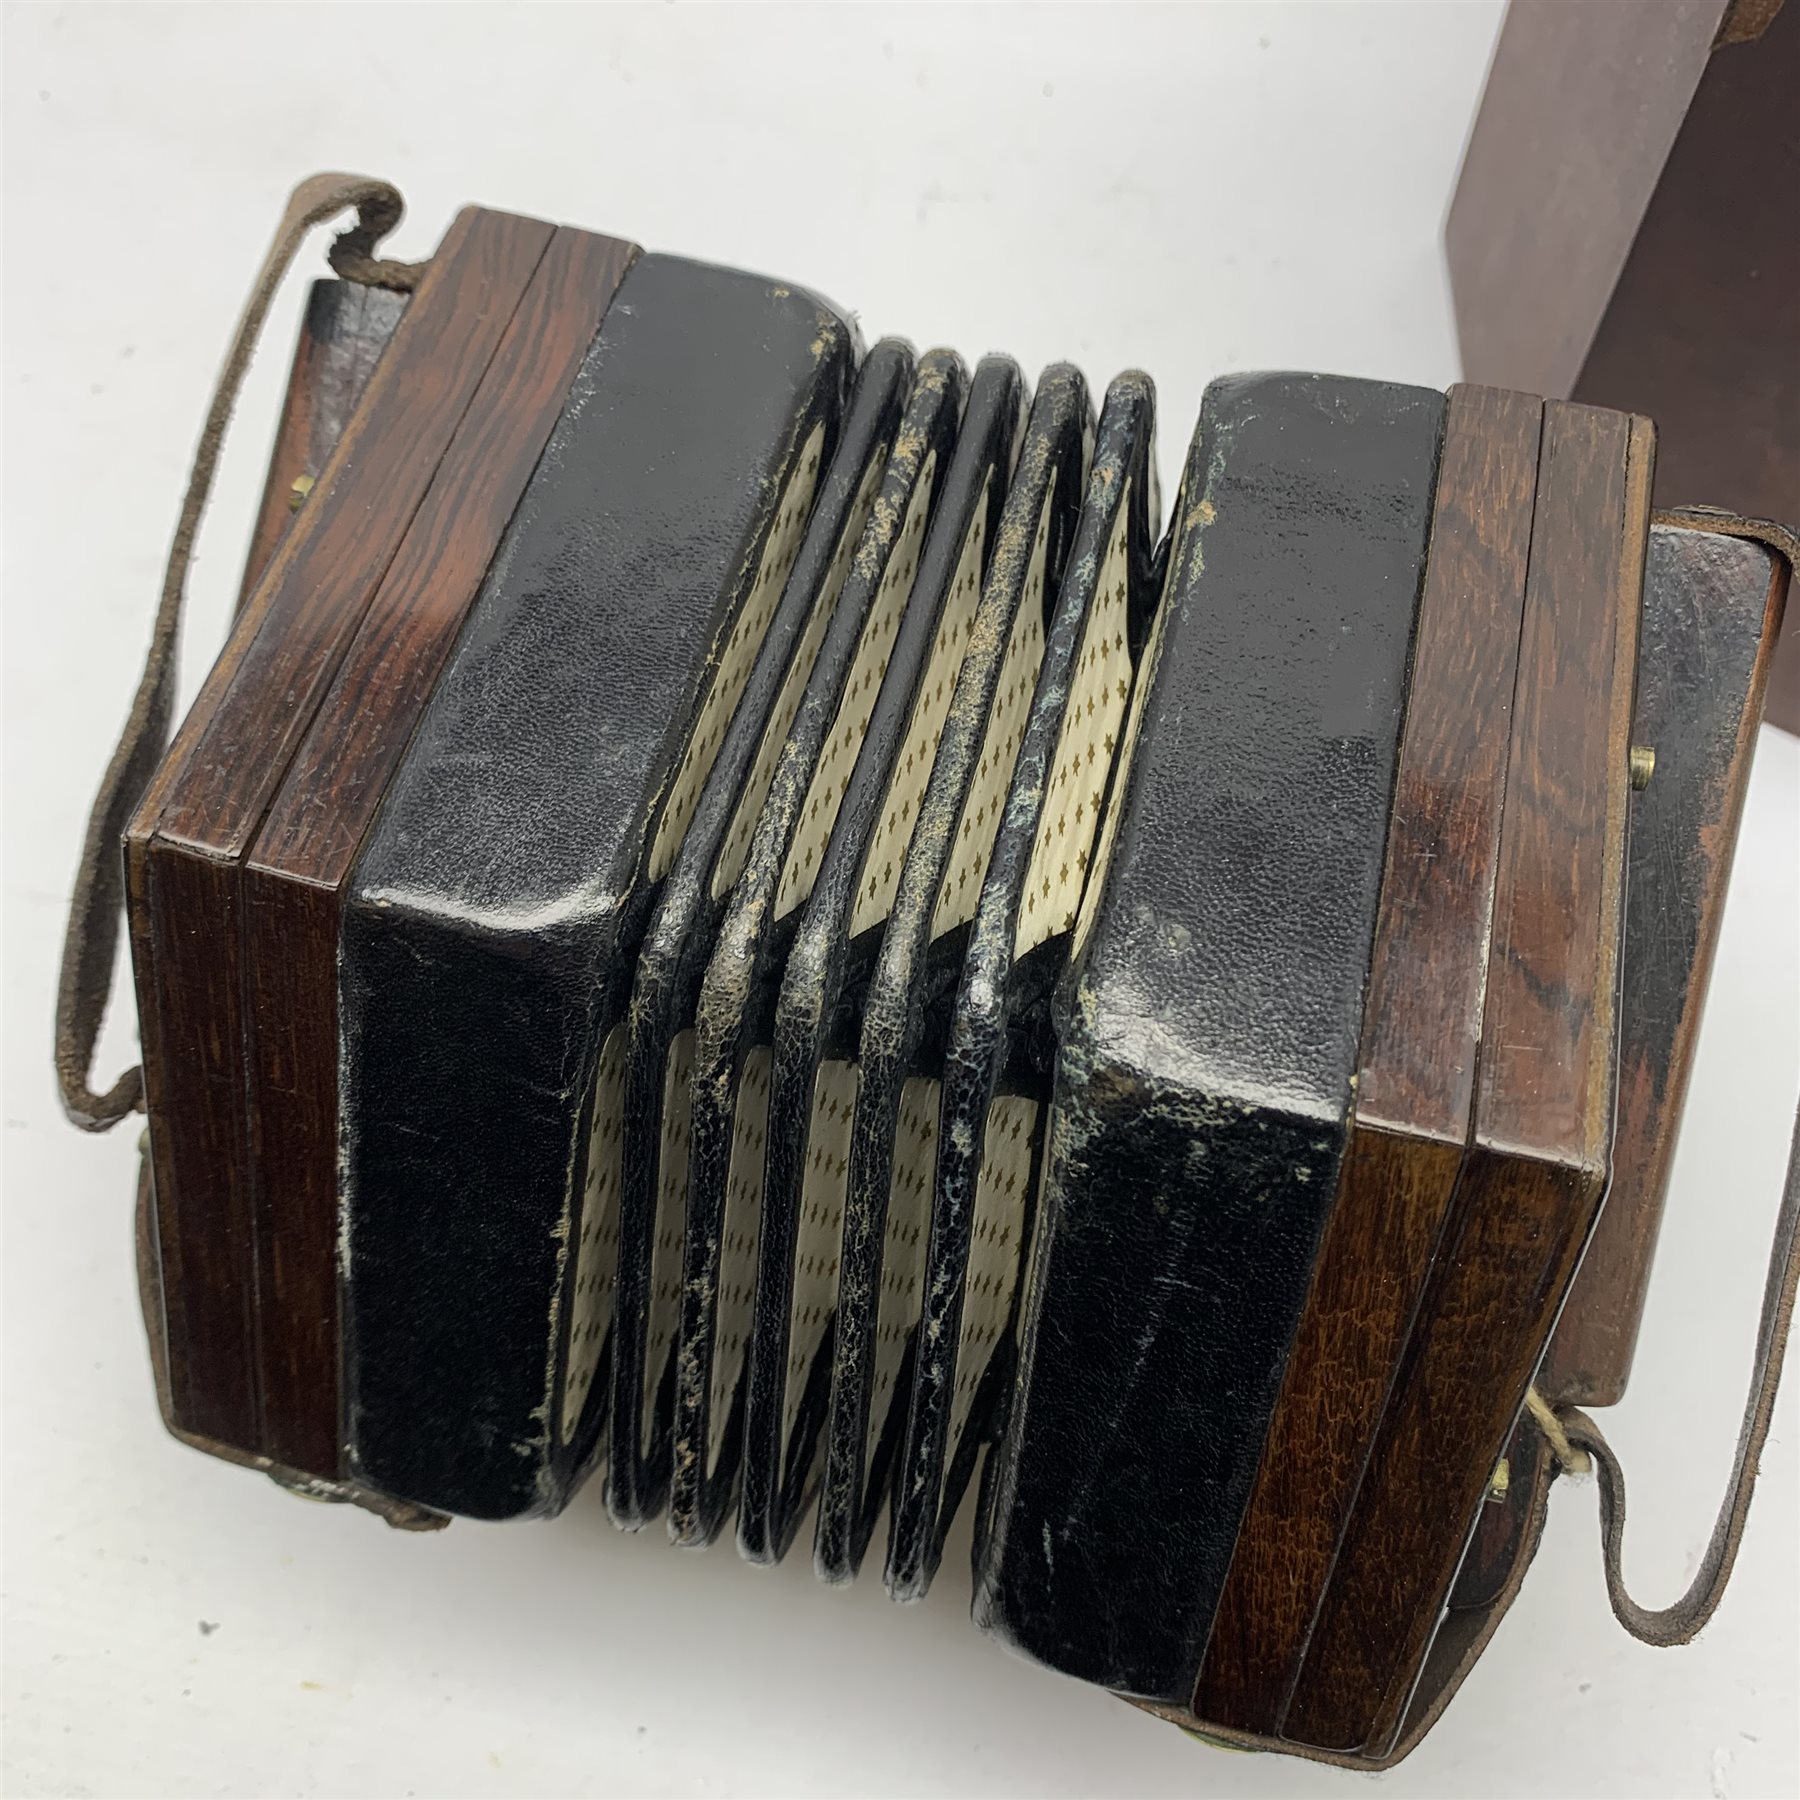 19th century rosewood concertina of hexagonal form with fretworked ends ...